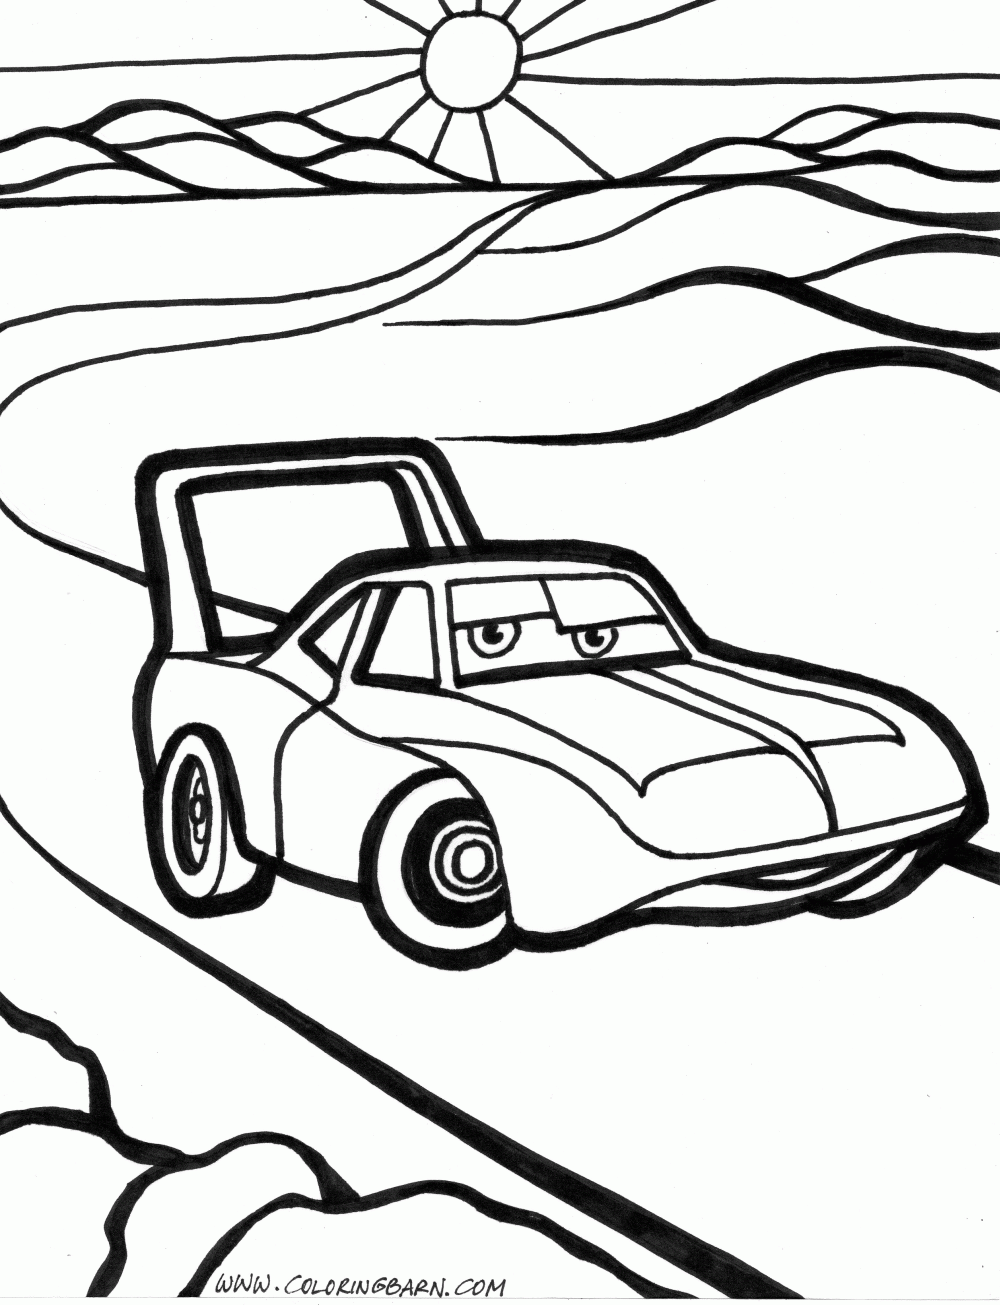 Cars coloring pages | online coloring pages disney | printable coloring pages for kids | #39